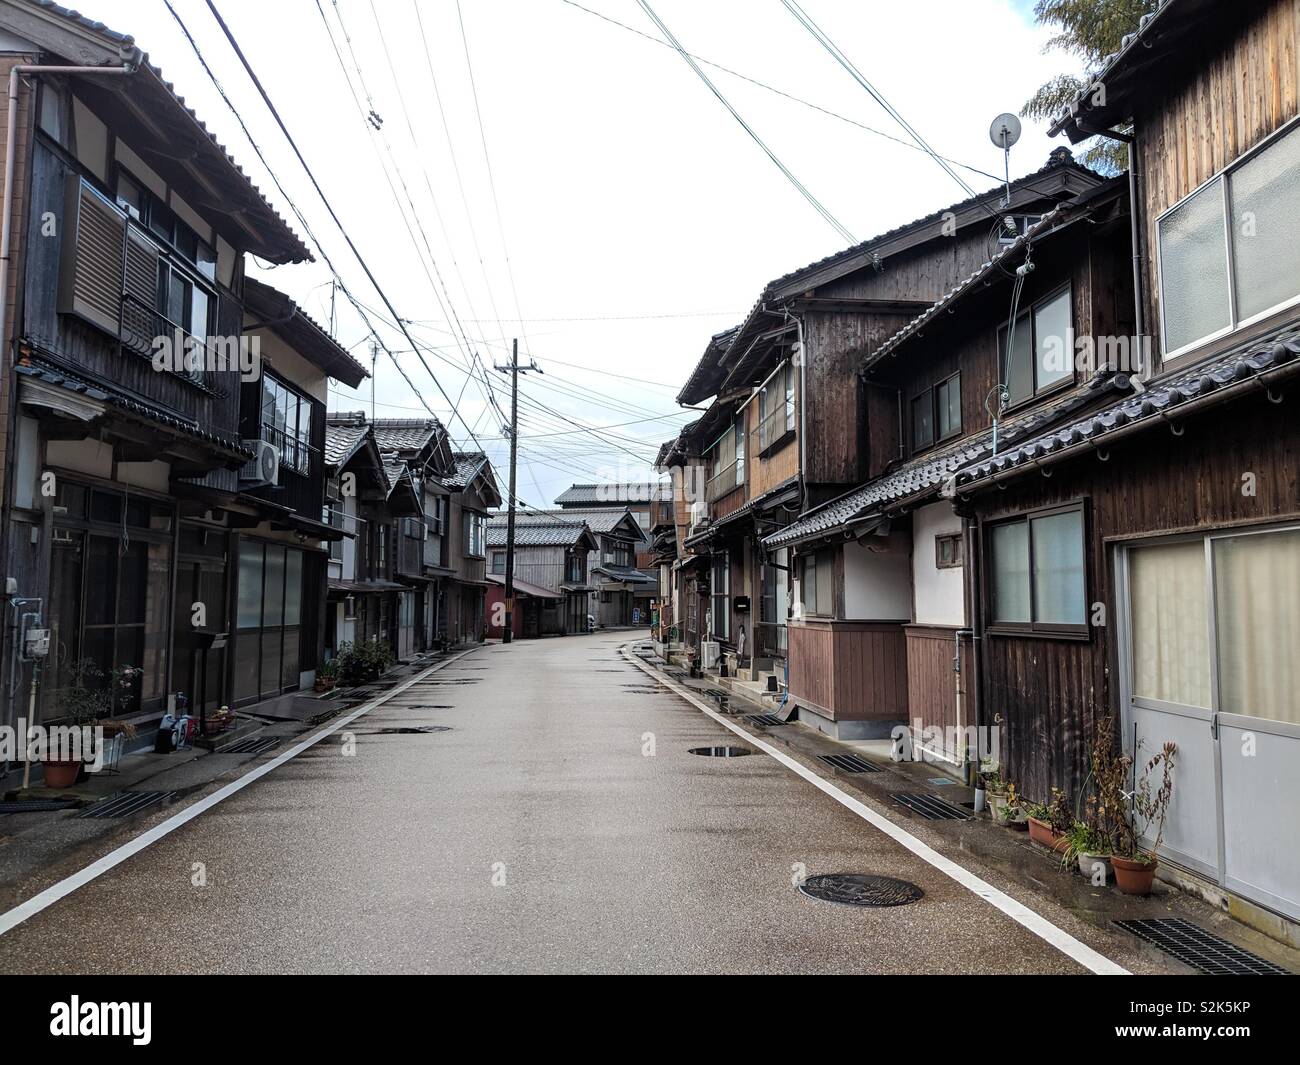 Local Street of a fishing village town, Ine, Kyoto Stock Photo